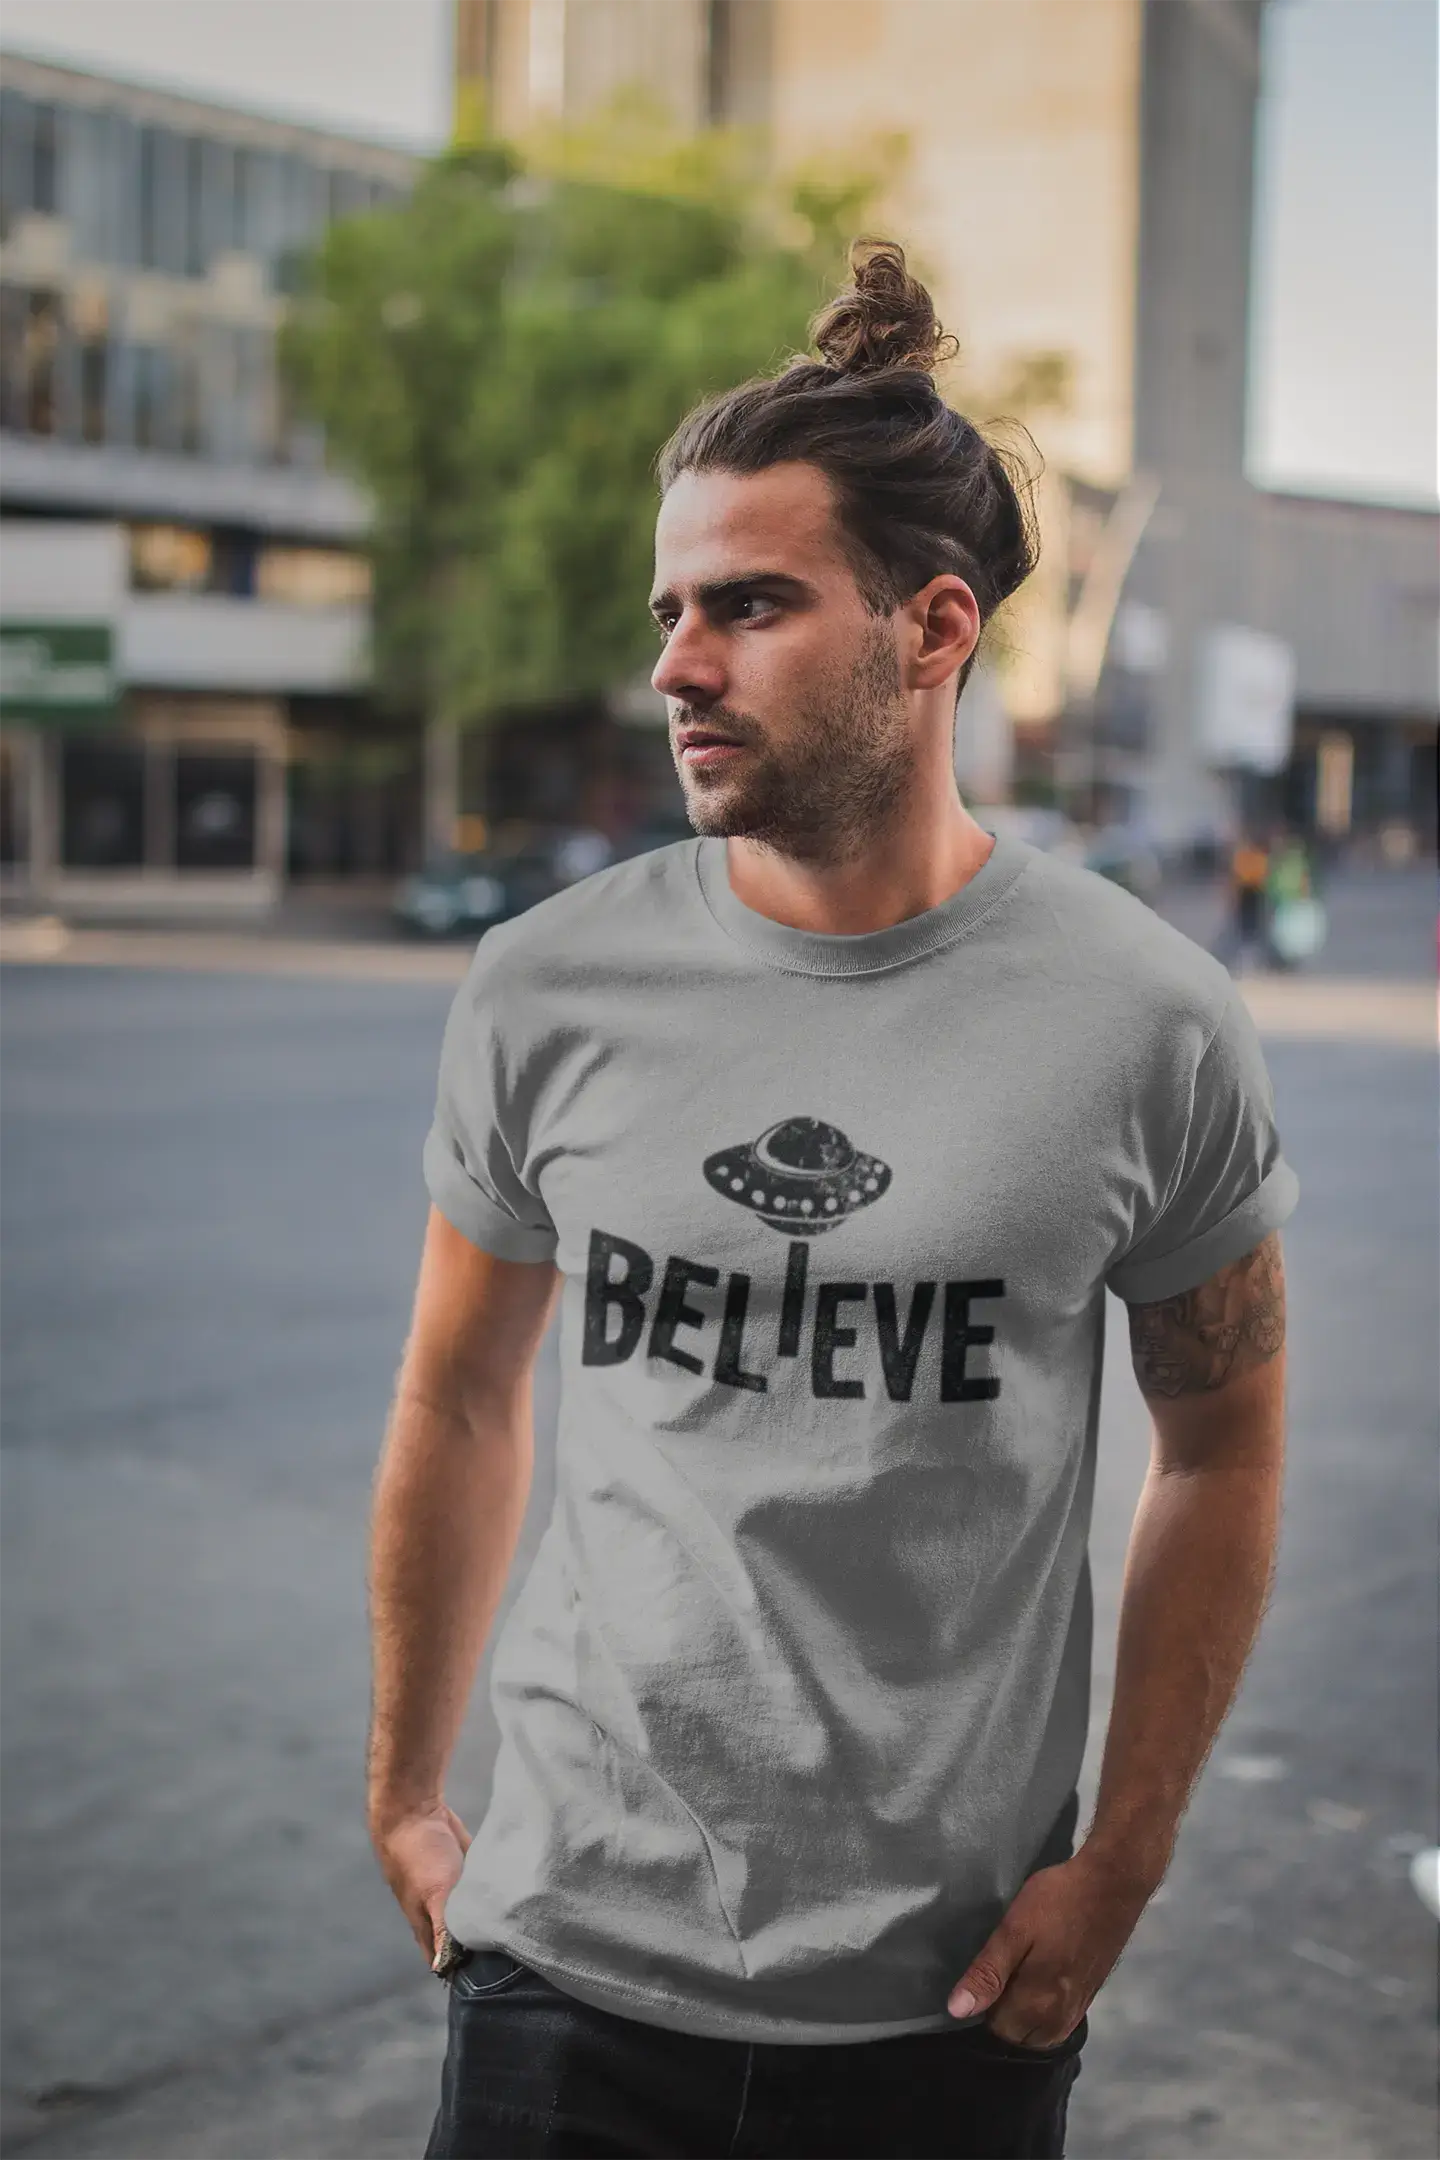 ULTRABASIC - Graphic Men's Believe UFO Alien T-Shirt Funny Casual Letter Print Tee Military Green